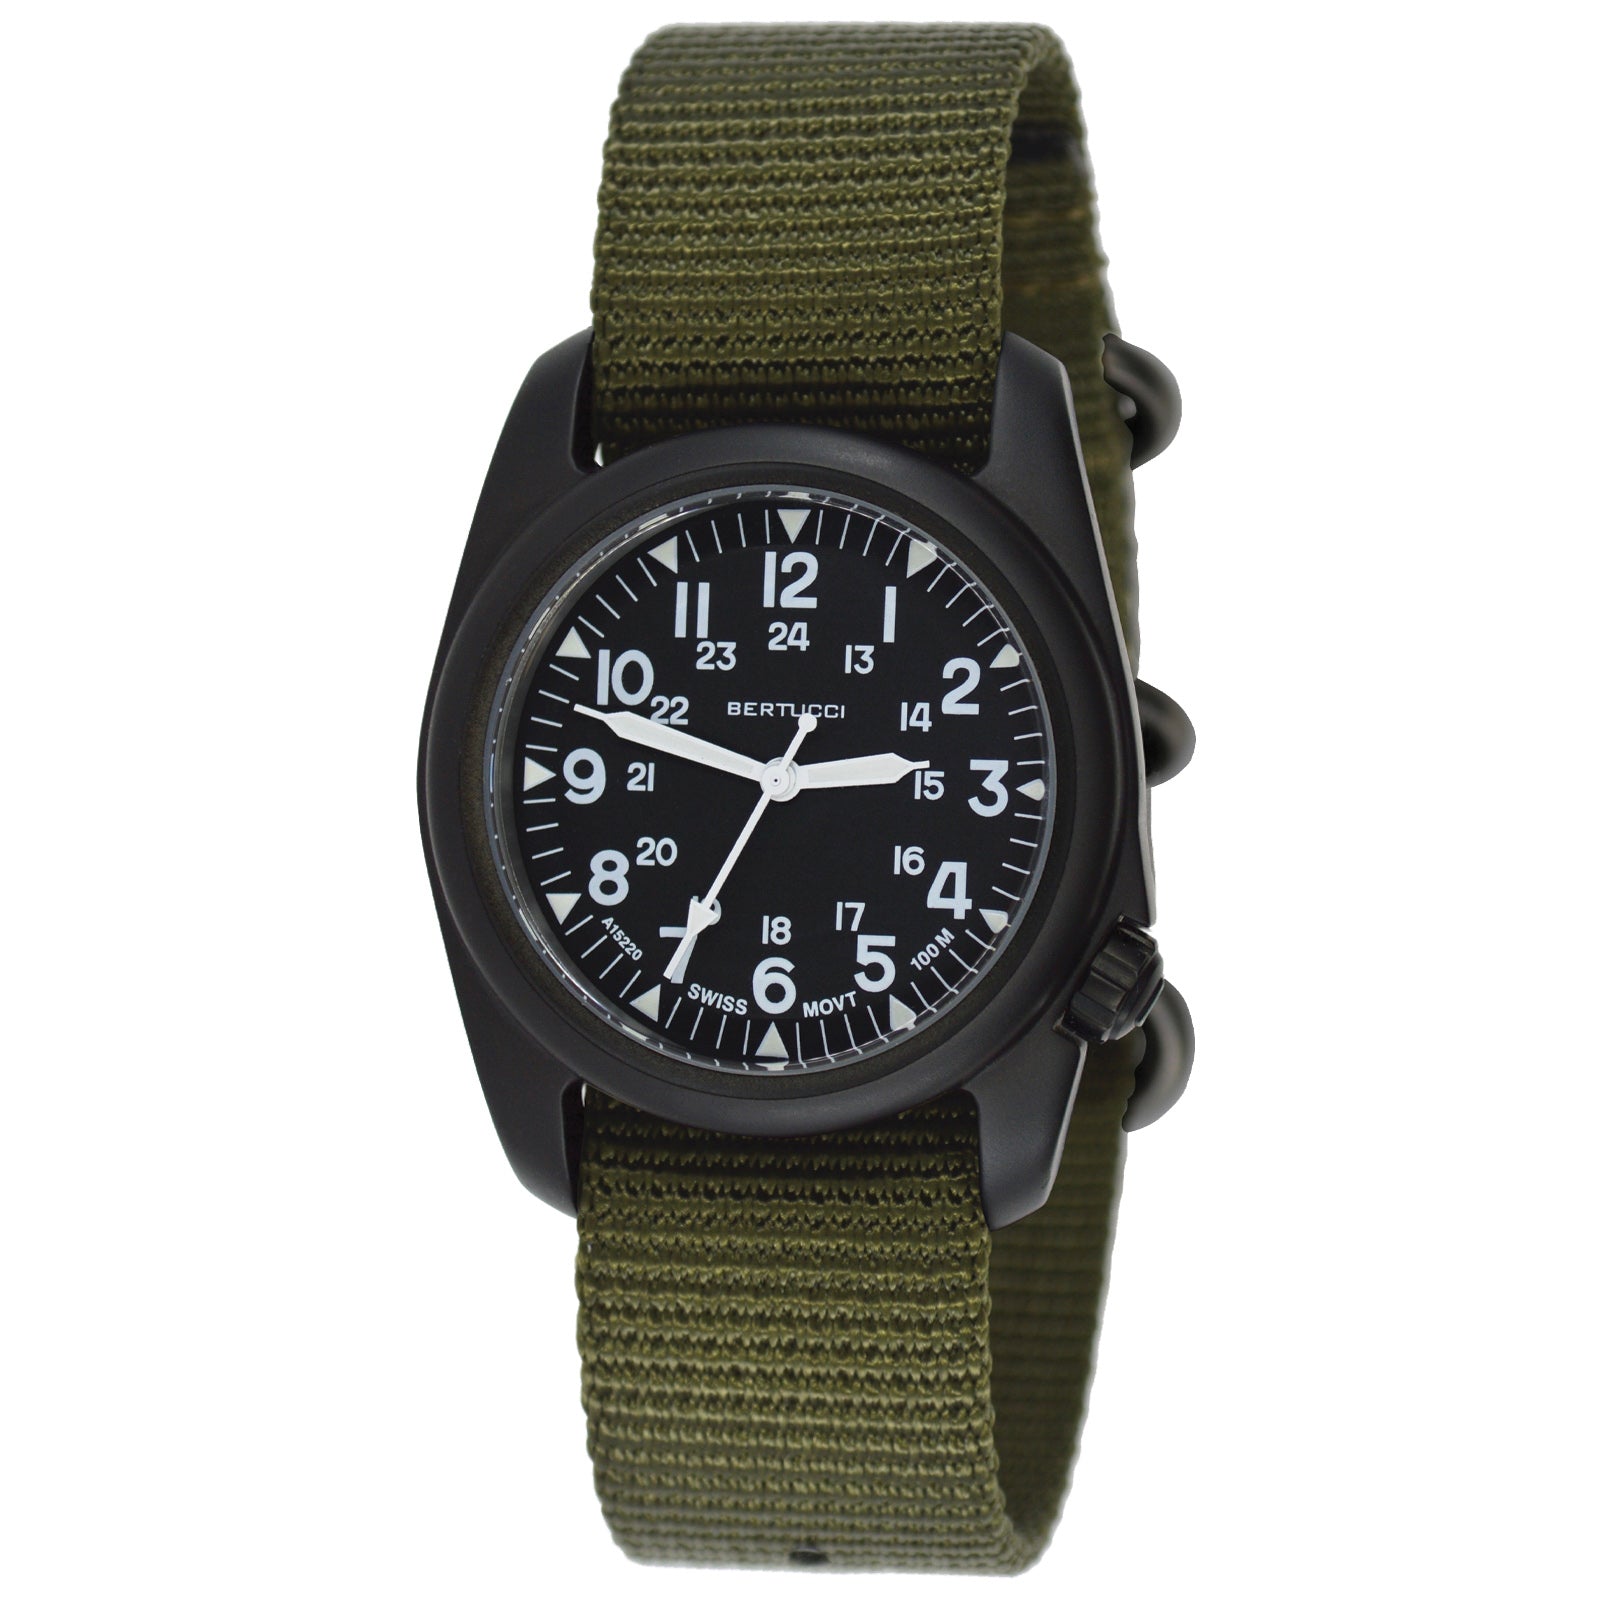 Defender Solar-Powered Stainless Steel Watch - FS5976 - Fossil